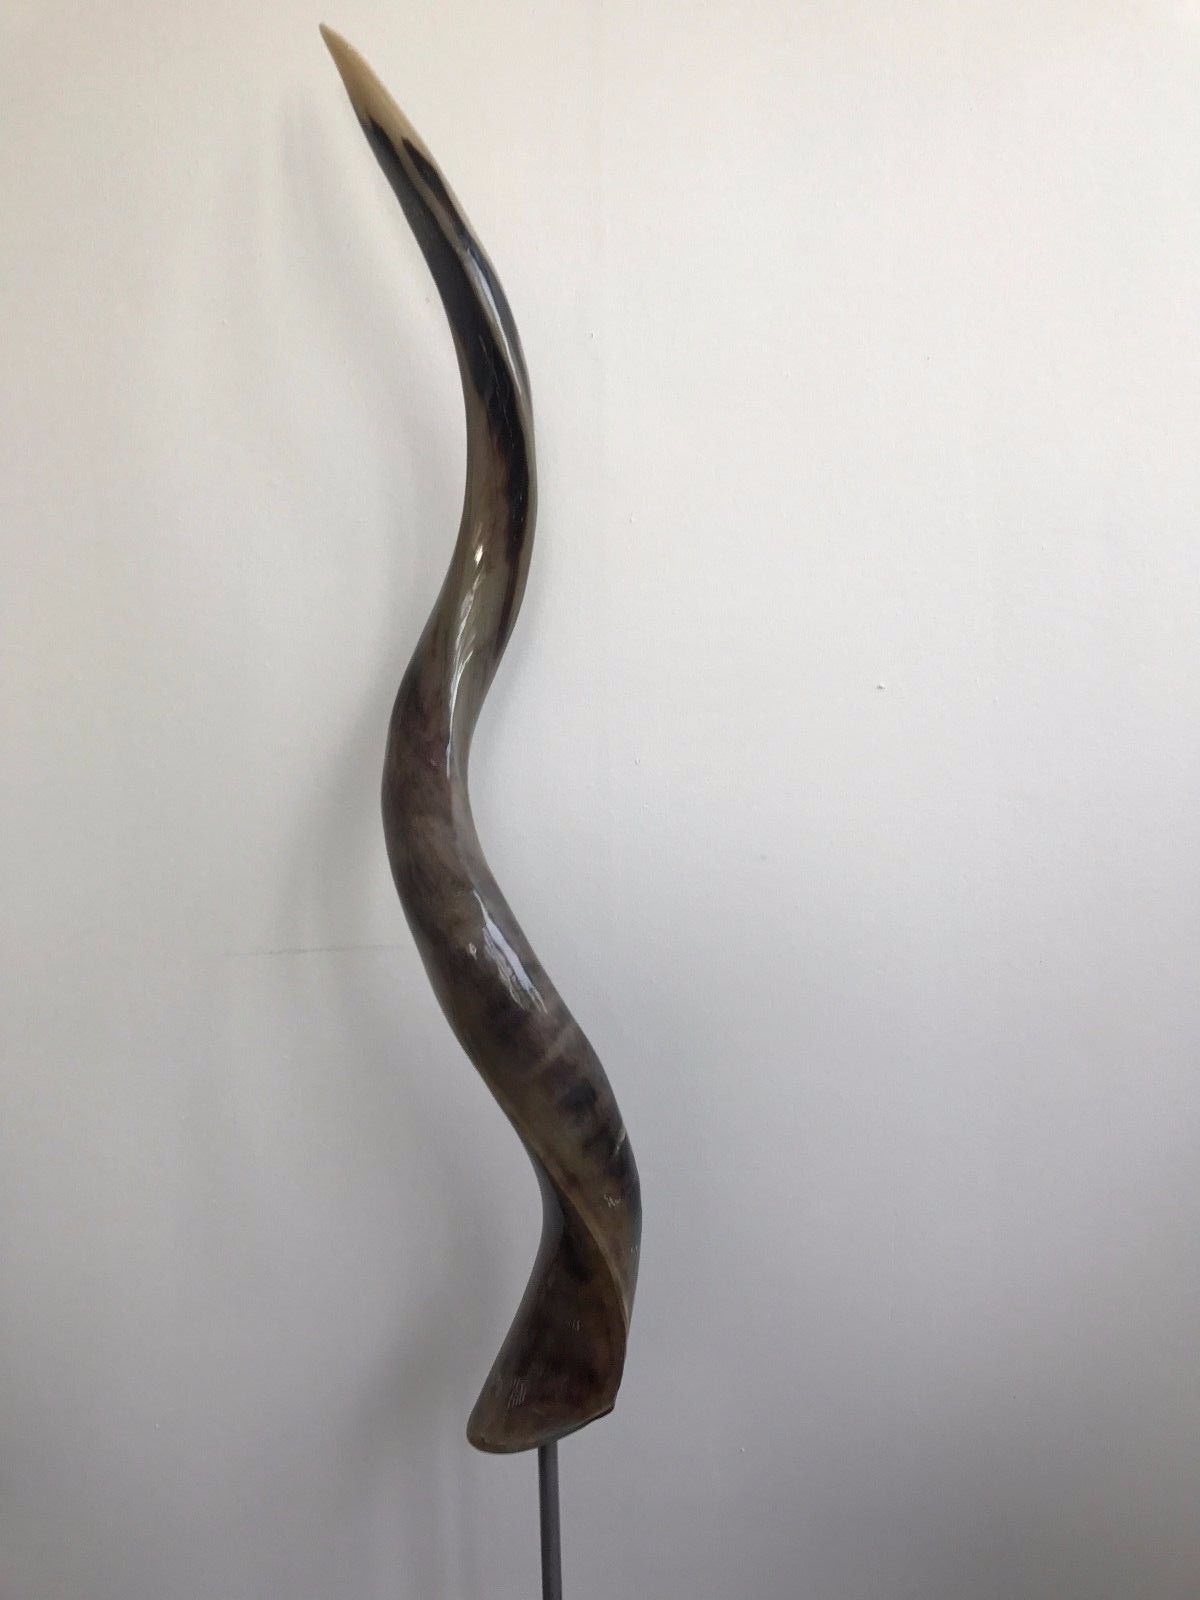 Polished Kudu Outer Horn on Metal Stand- African Antelope Polished Horn Stand